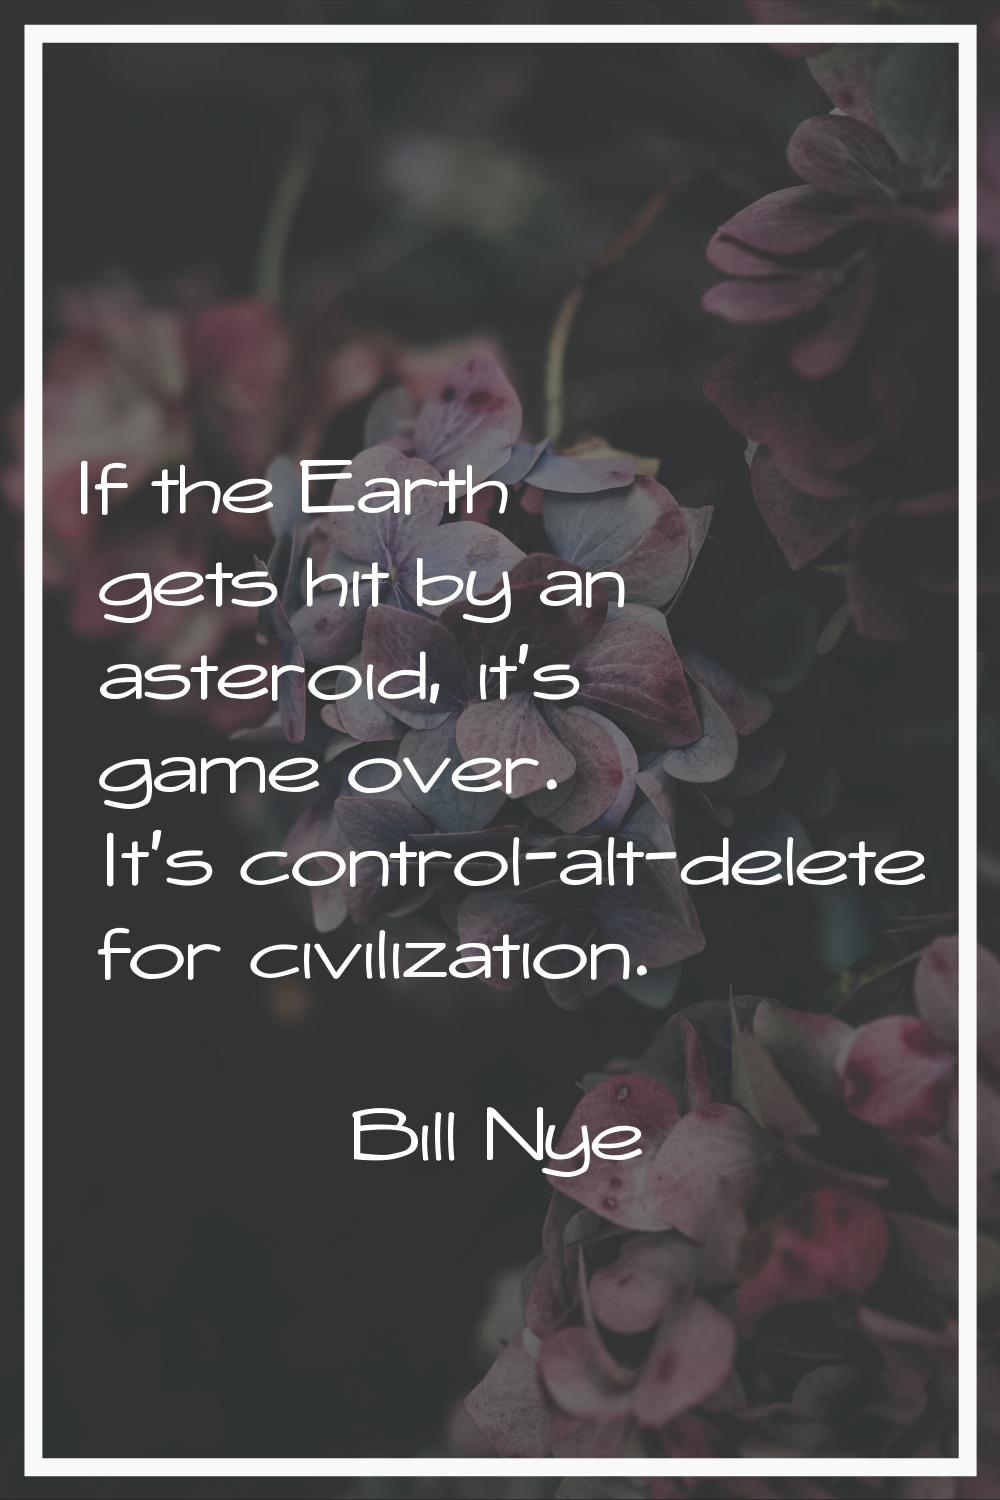 If the Earth gets hit by an asteroid, it's game over. It's control-alt-delete for civilization.